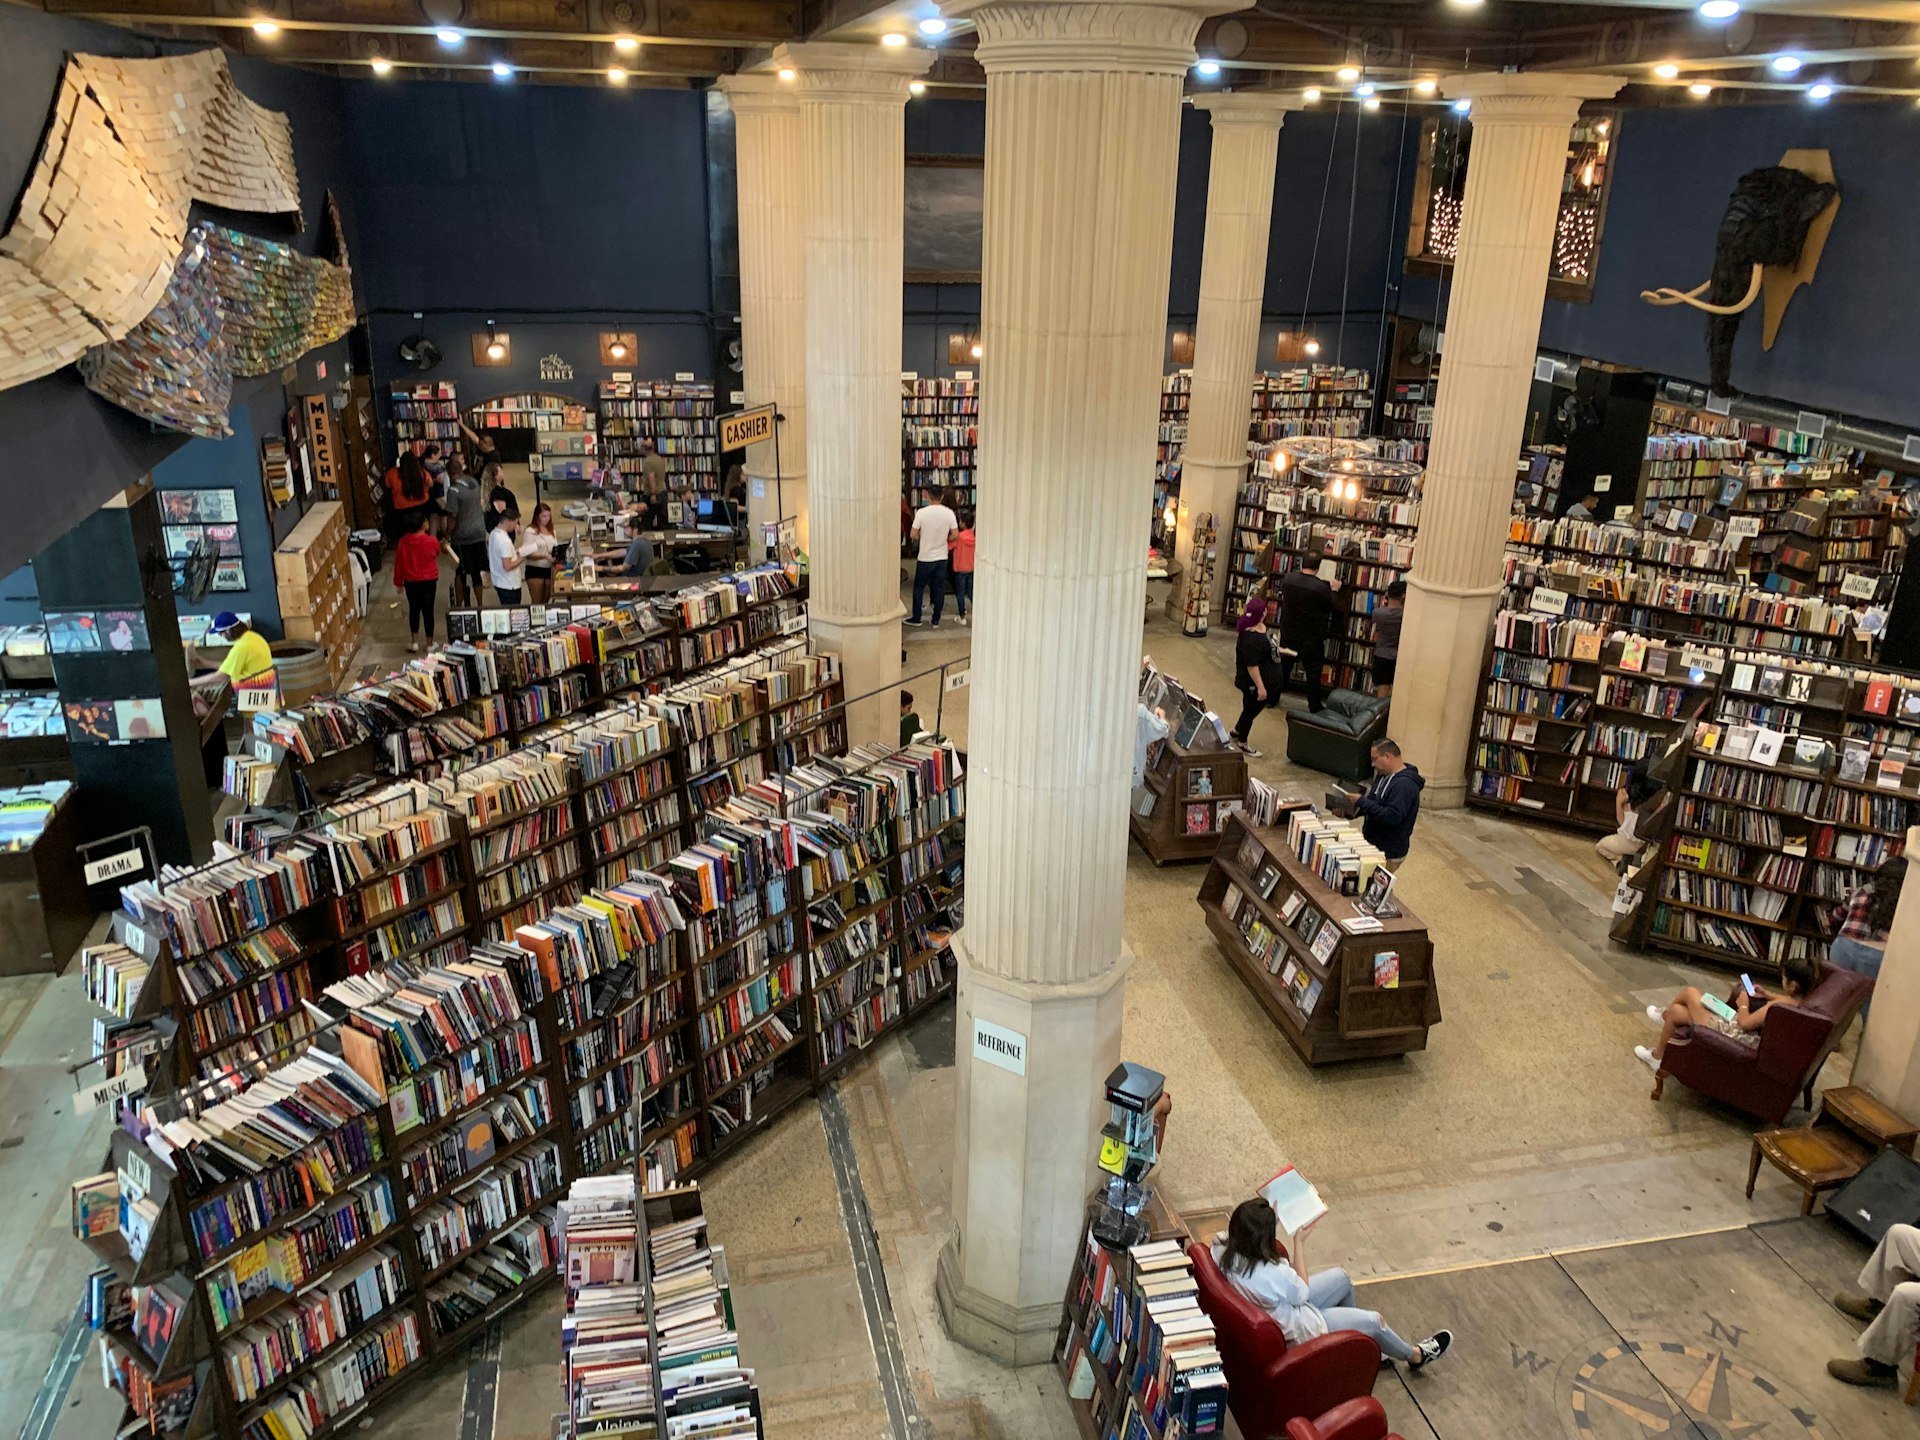 Displays of books in the grand atrium of The Last Bookstore, Downtown, Los Angeles, California, USA